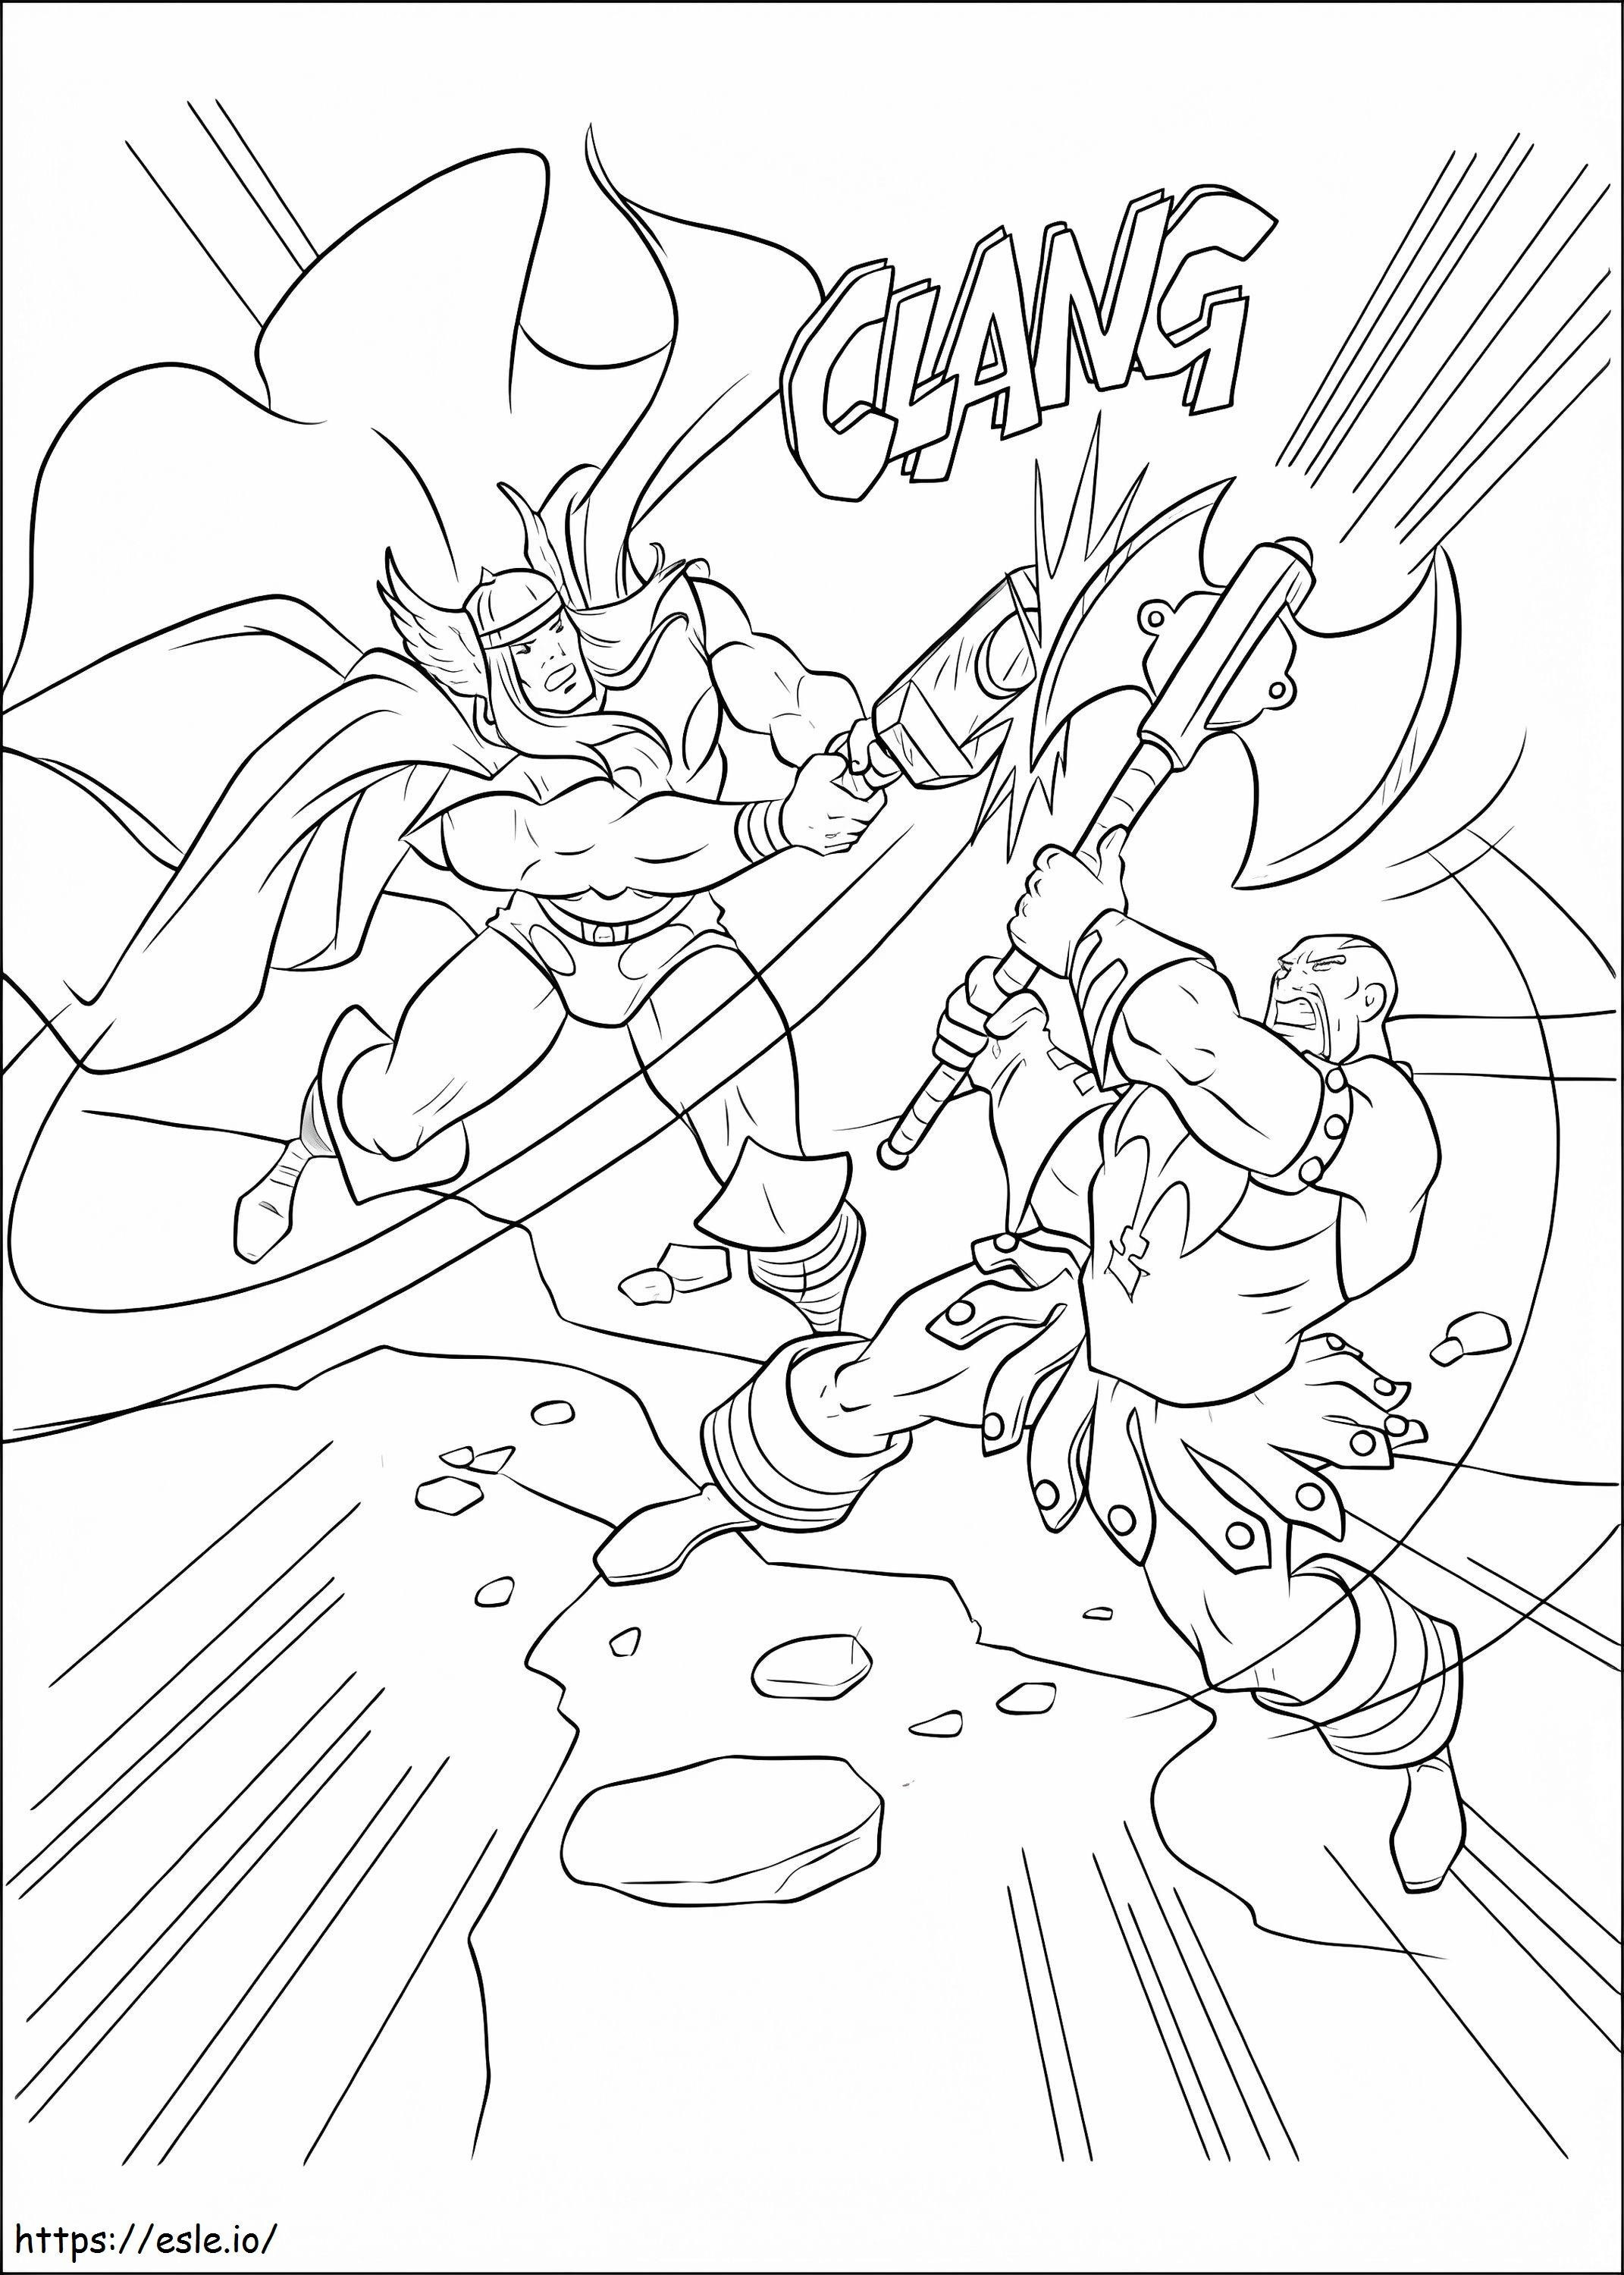 Thor Fights Villain coloring page